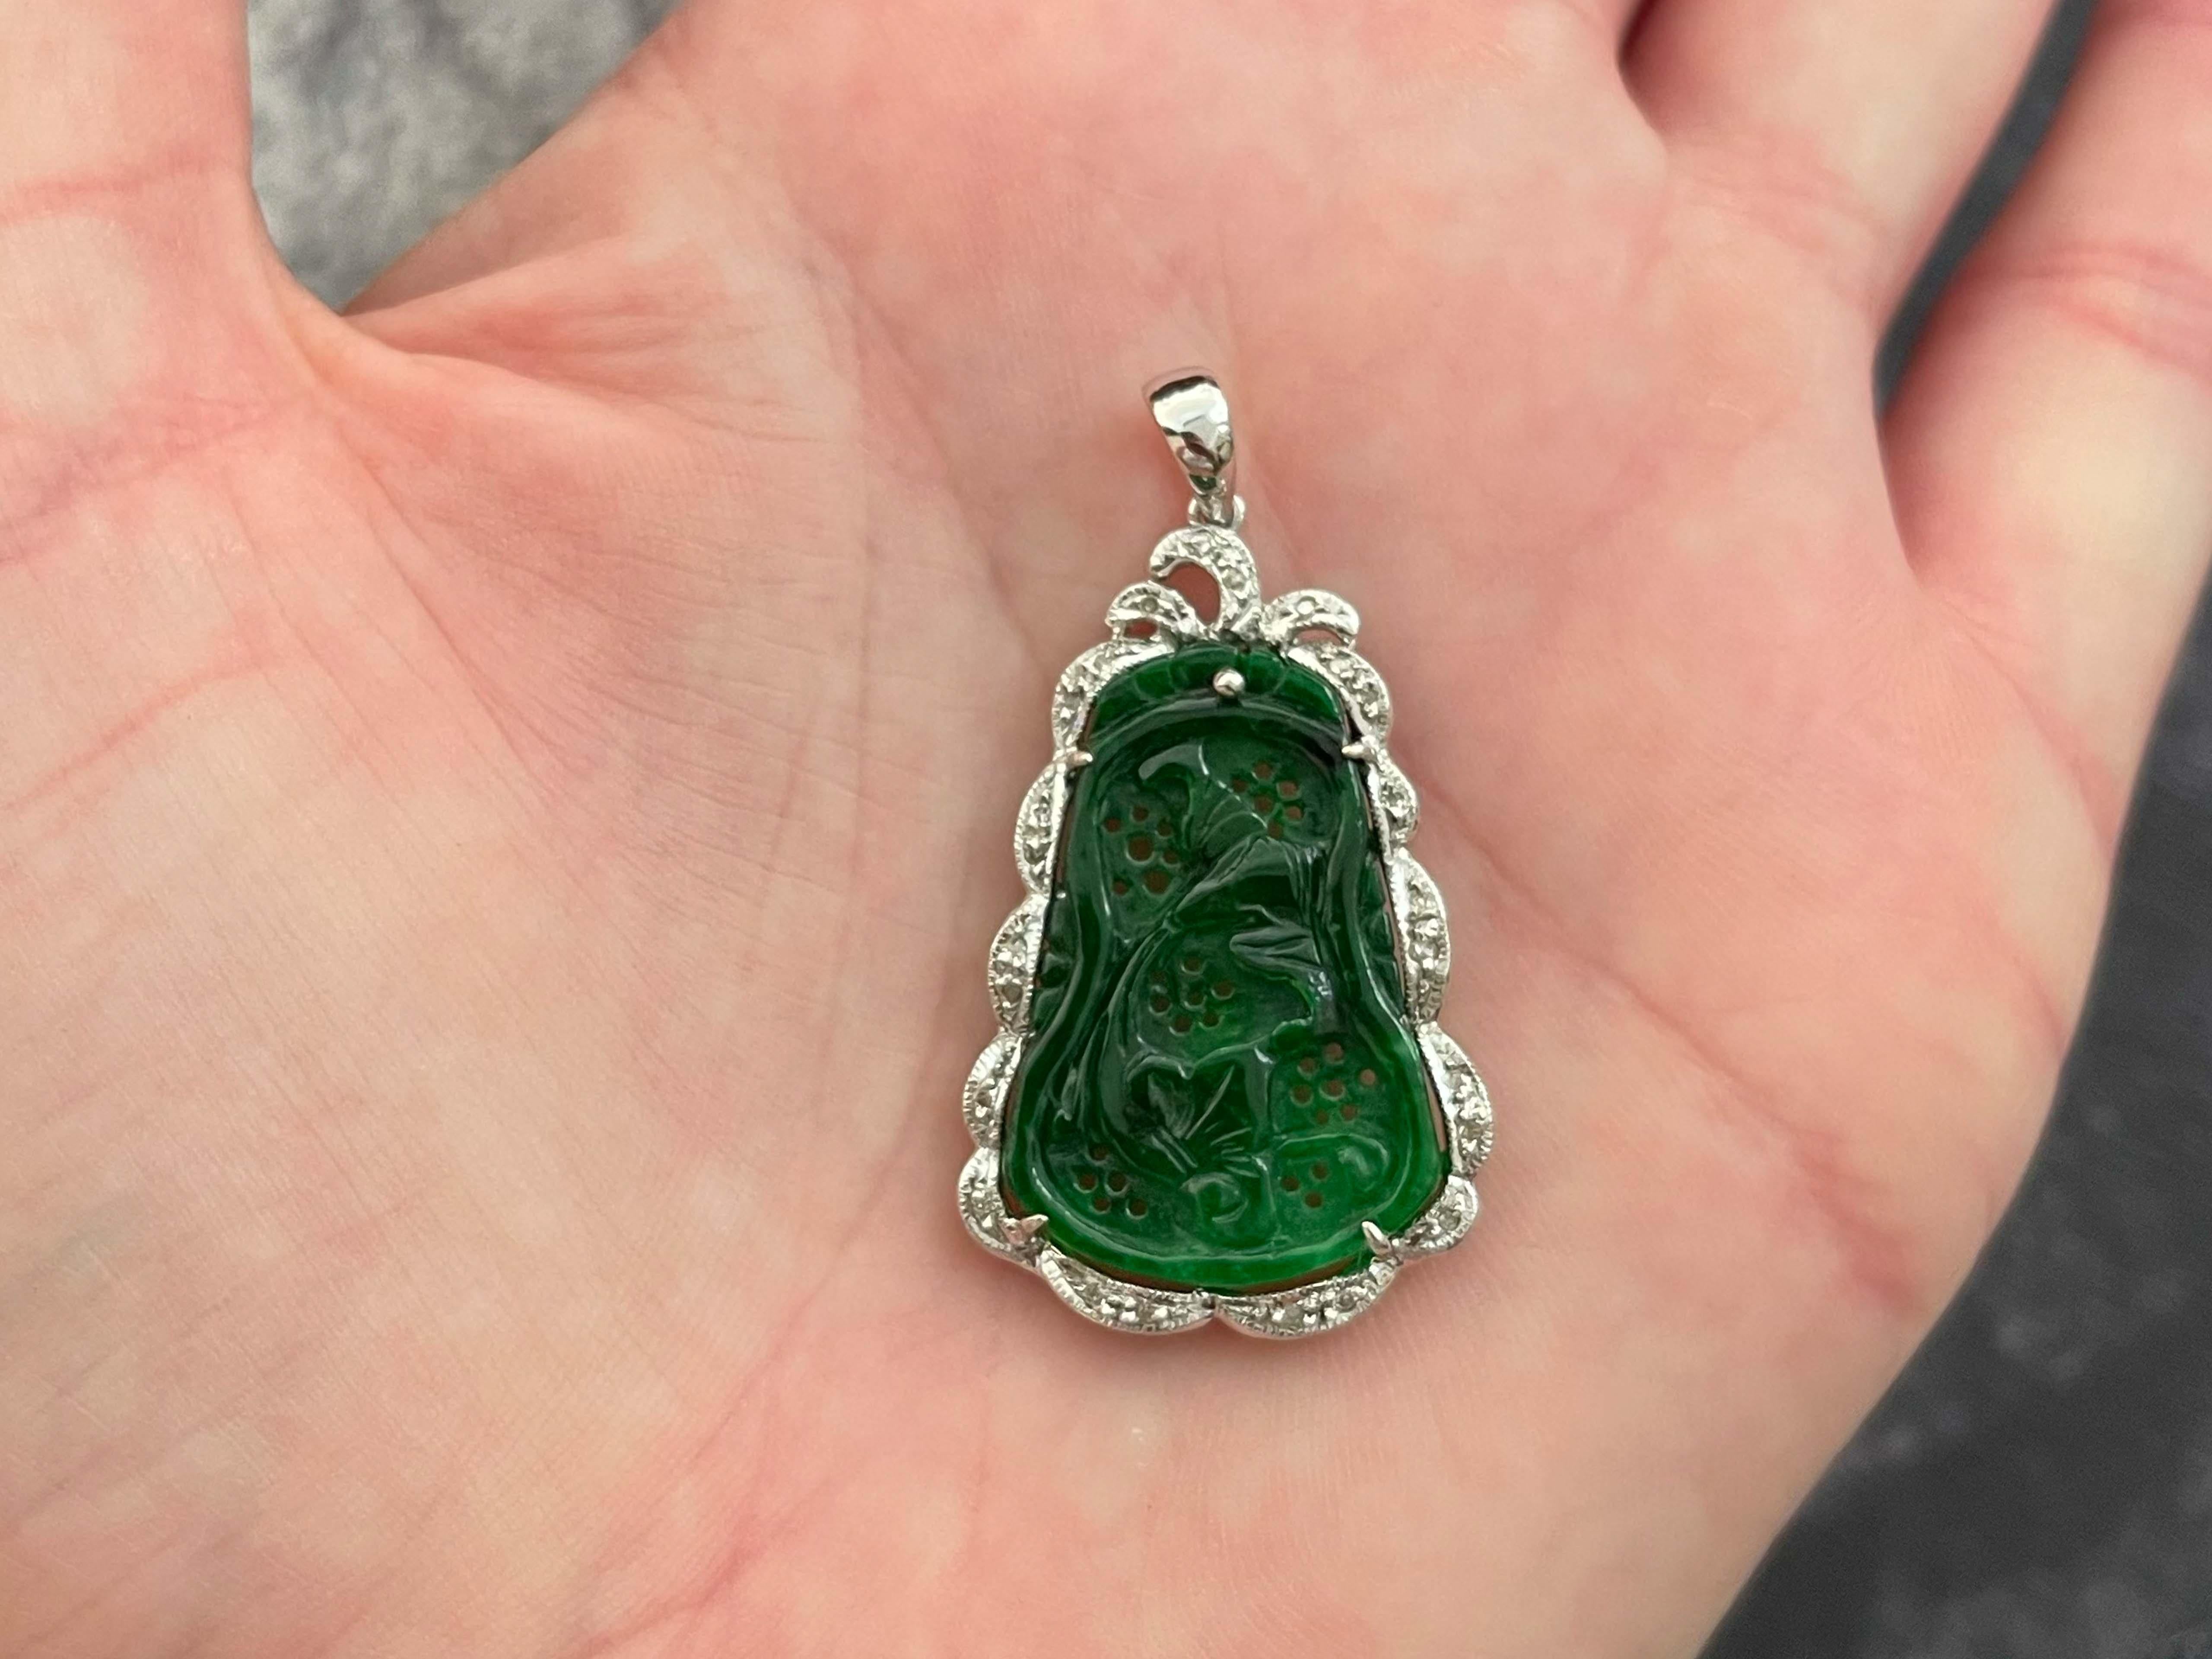 Item Specifications:

Metal: 14k White Gold

Pendant Measurements with Bail: 41 mm x 22 mm

Total Weight: 3.92 Grams

Lab Report: GIA

GIA Report #:  5231035376

Gemstone Specifications:

Species: Jadeite Jade

Shape: Pierced Carving

Transparency: